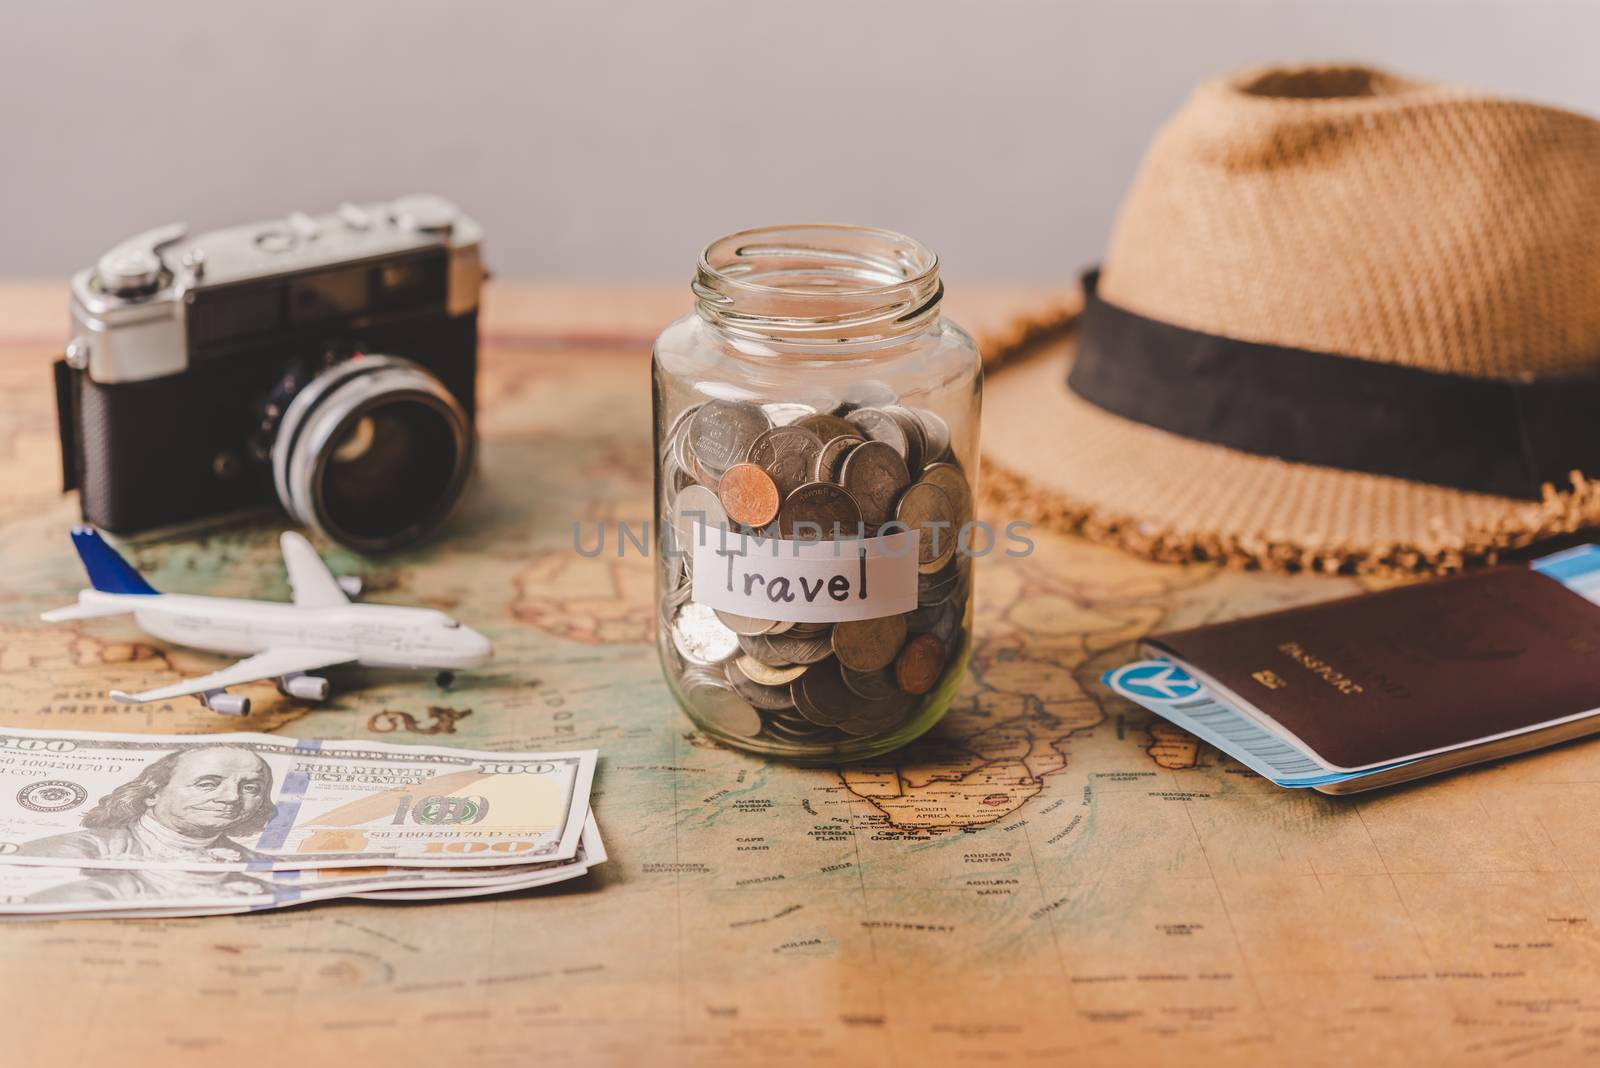 The money in the jar stored on the map, along with a passport, concept to collect money for travel.